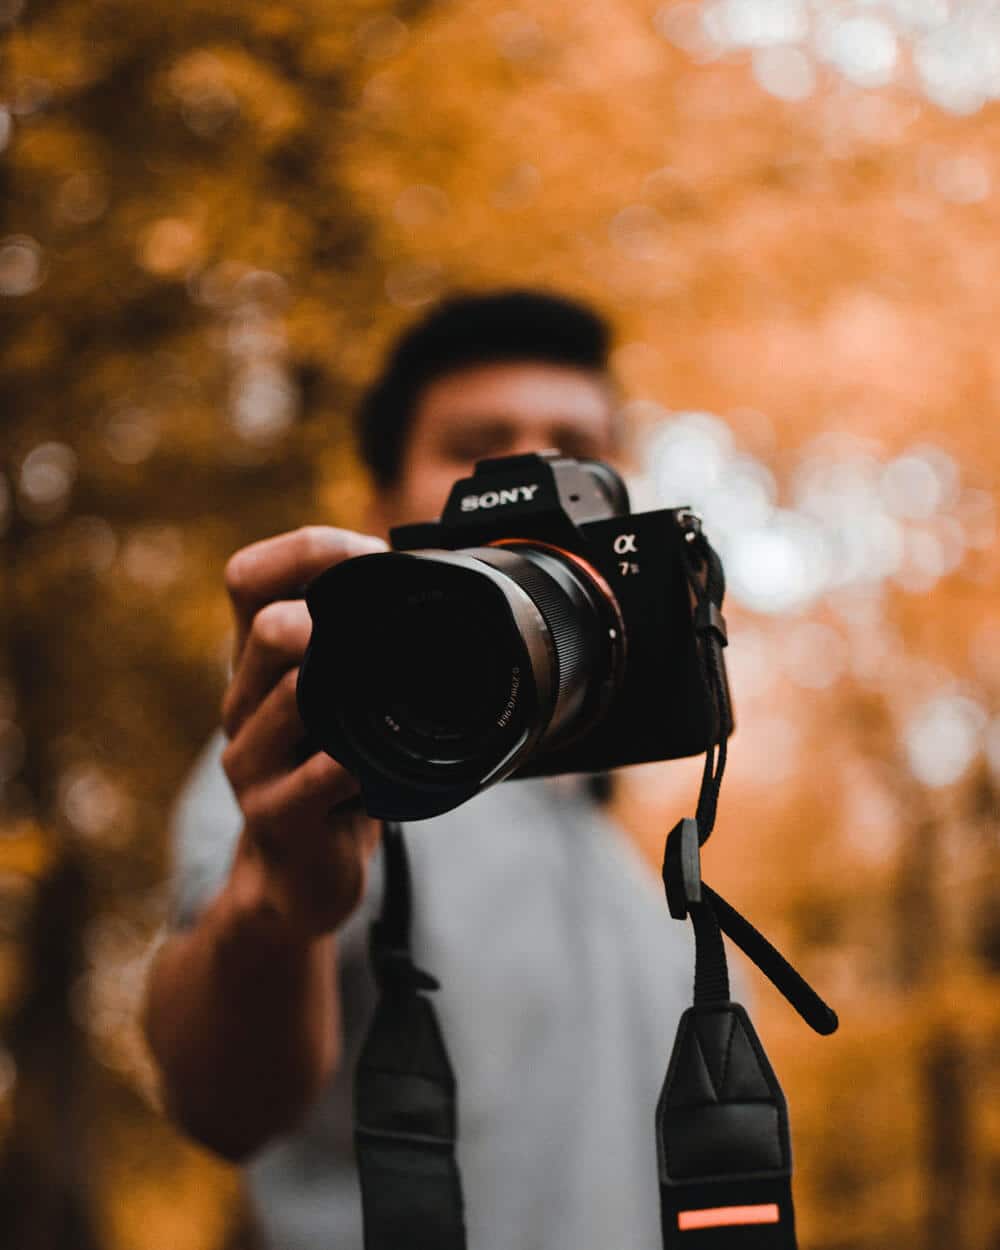 out of focus orange autumnal background, guy holding camera towards the lens covering his face